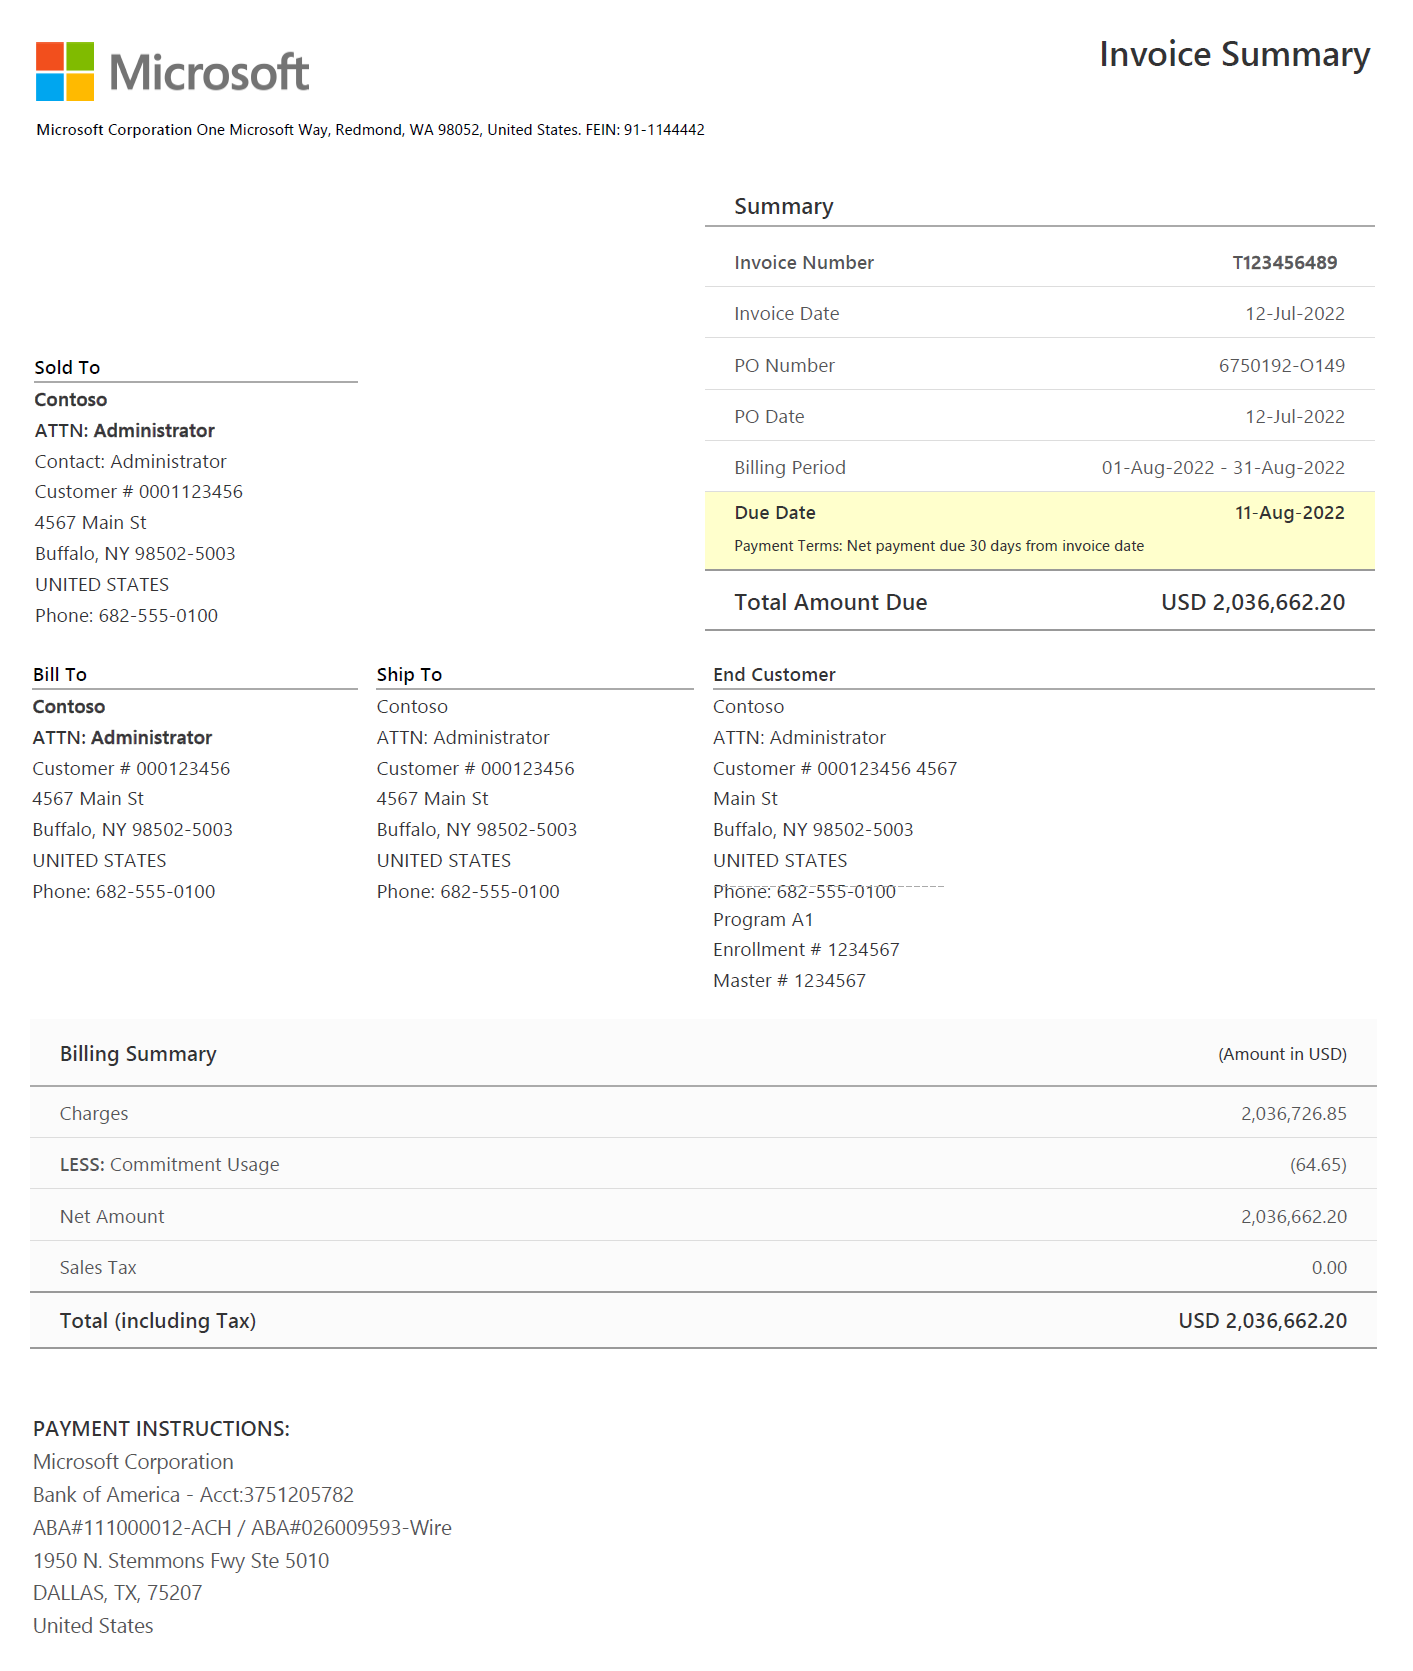 Example screenshot of the first page of the summary invoice file.